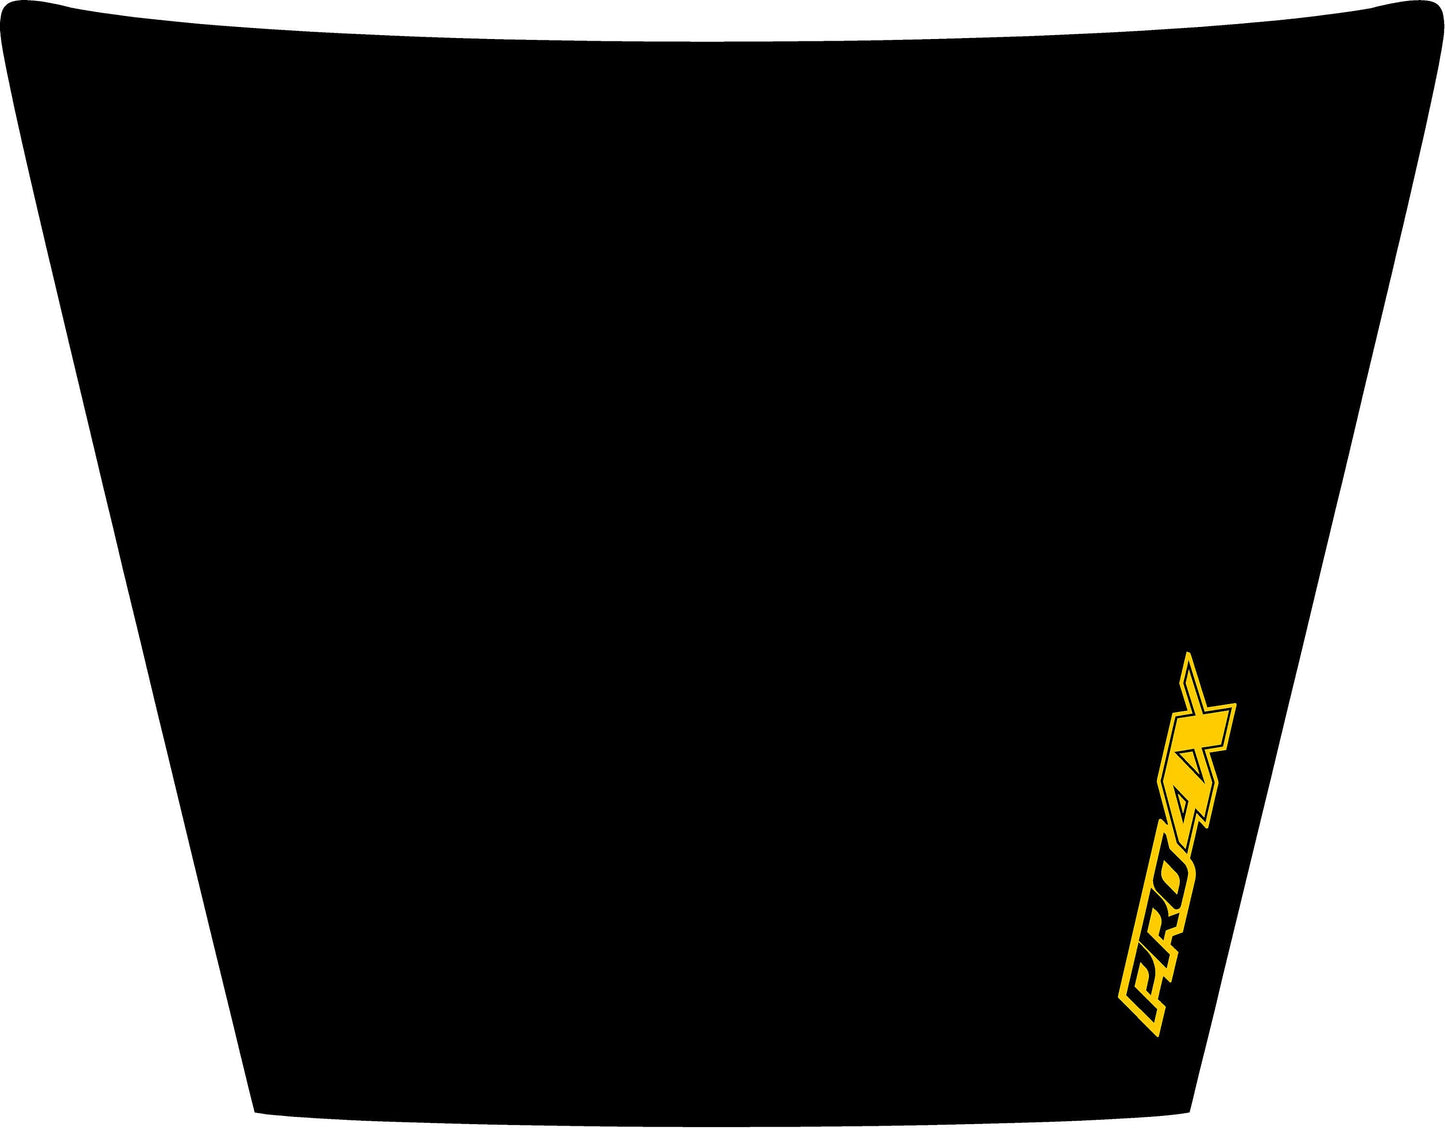 Yellow Pro4x 2005 to 2021 Nissan Frontier Hood Graphic Blackout - MATTE BLACK